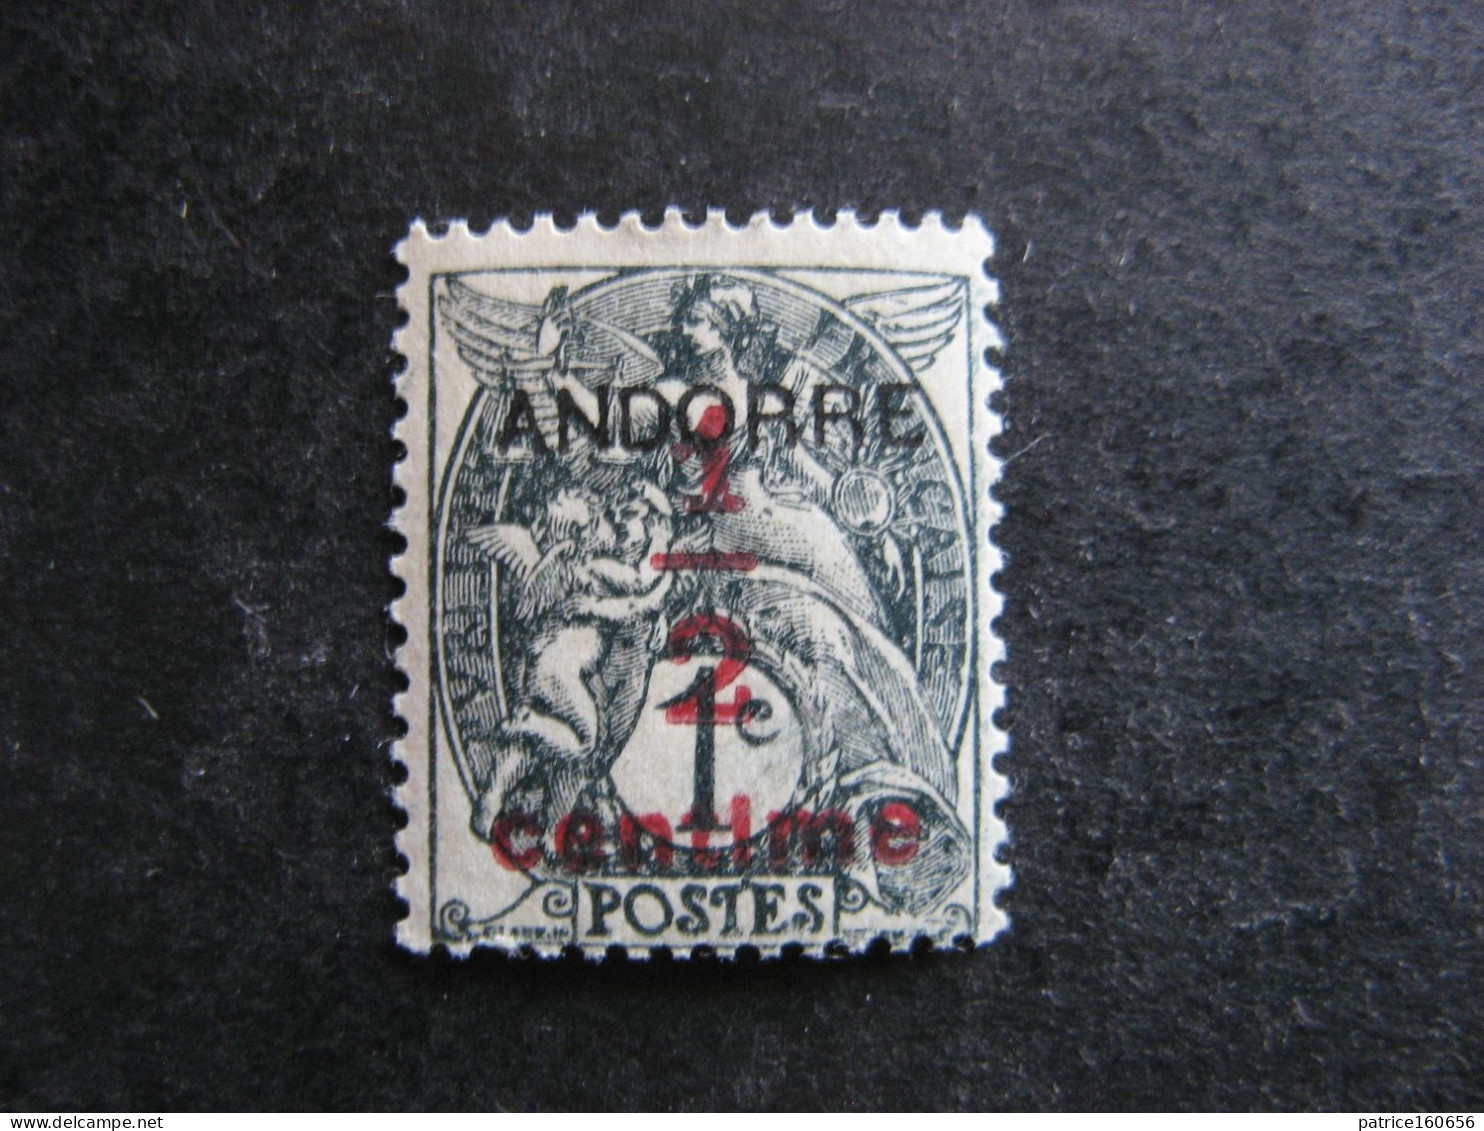 TB Timbre D'Andorre N°1, Neuf XX. - Unused Stamps